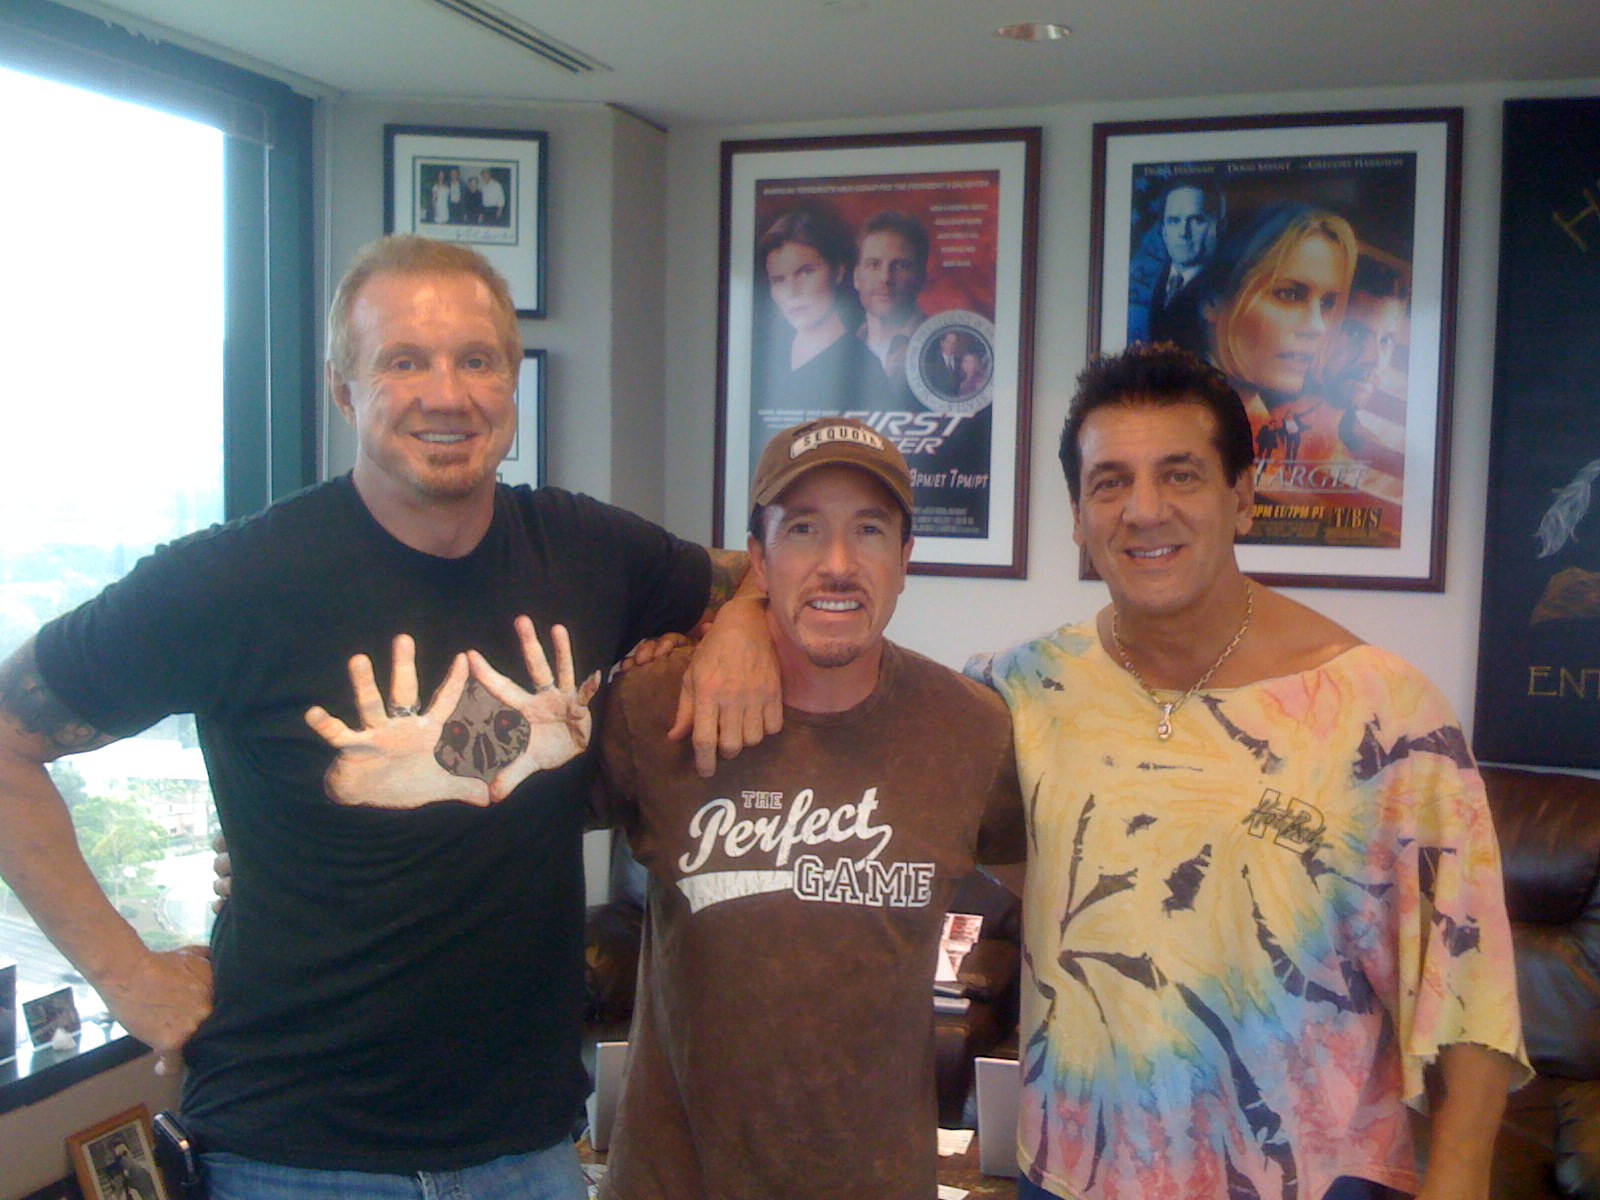 DDP, Salz, and Zito at the Highroad office. Universal City, CA